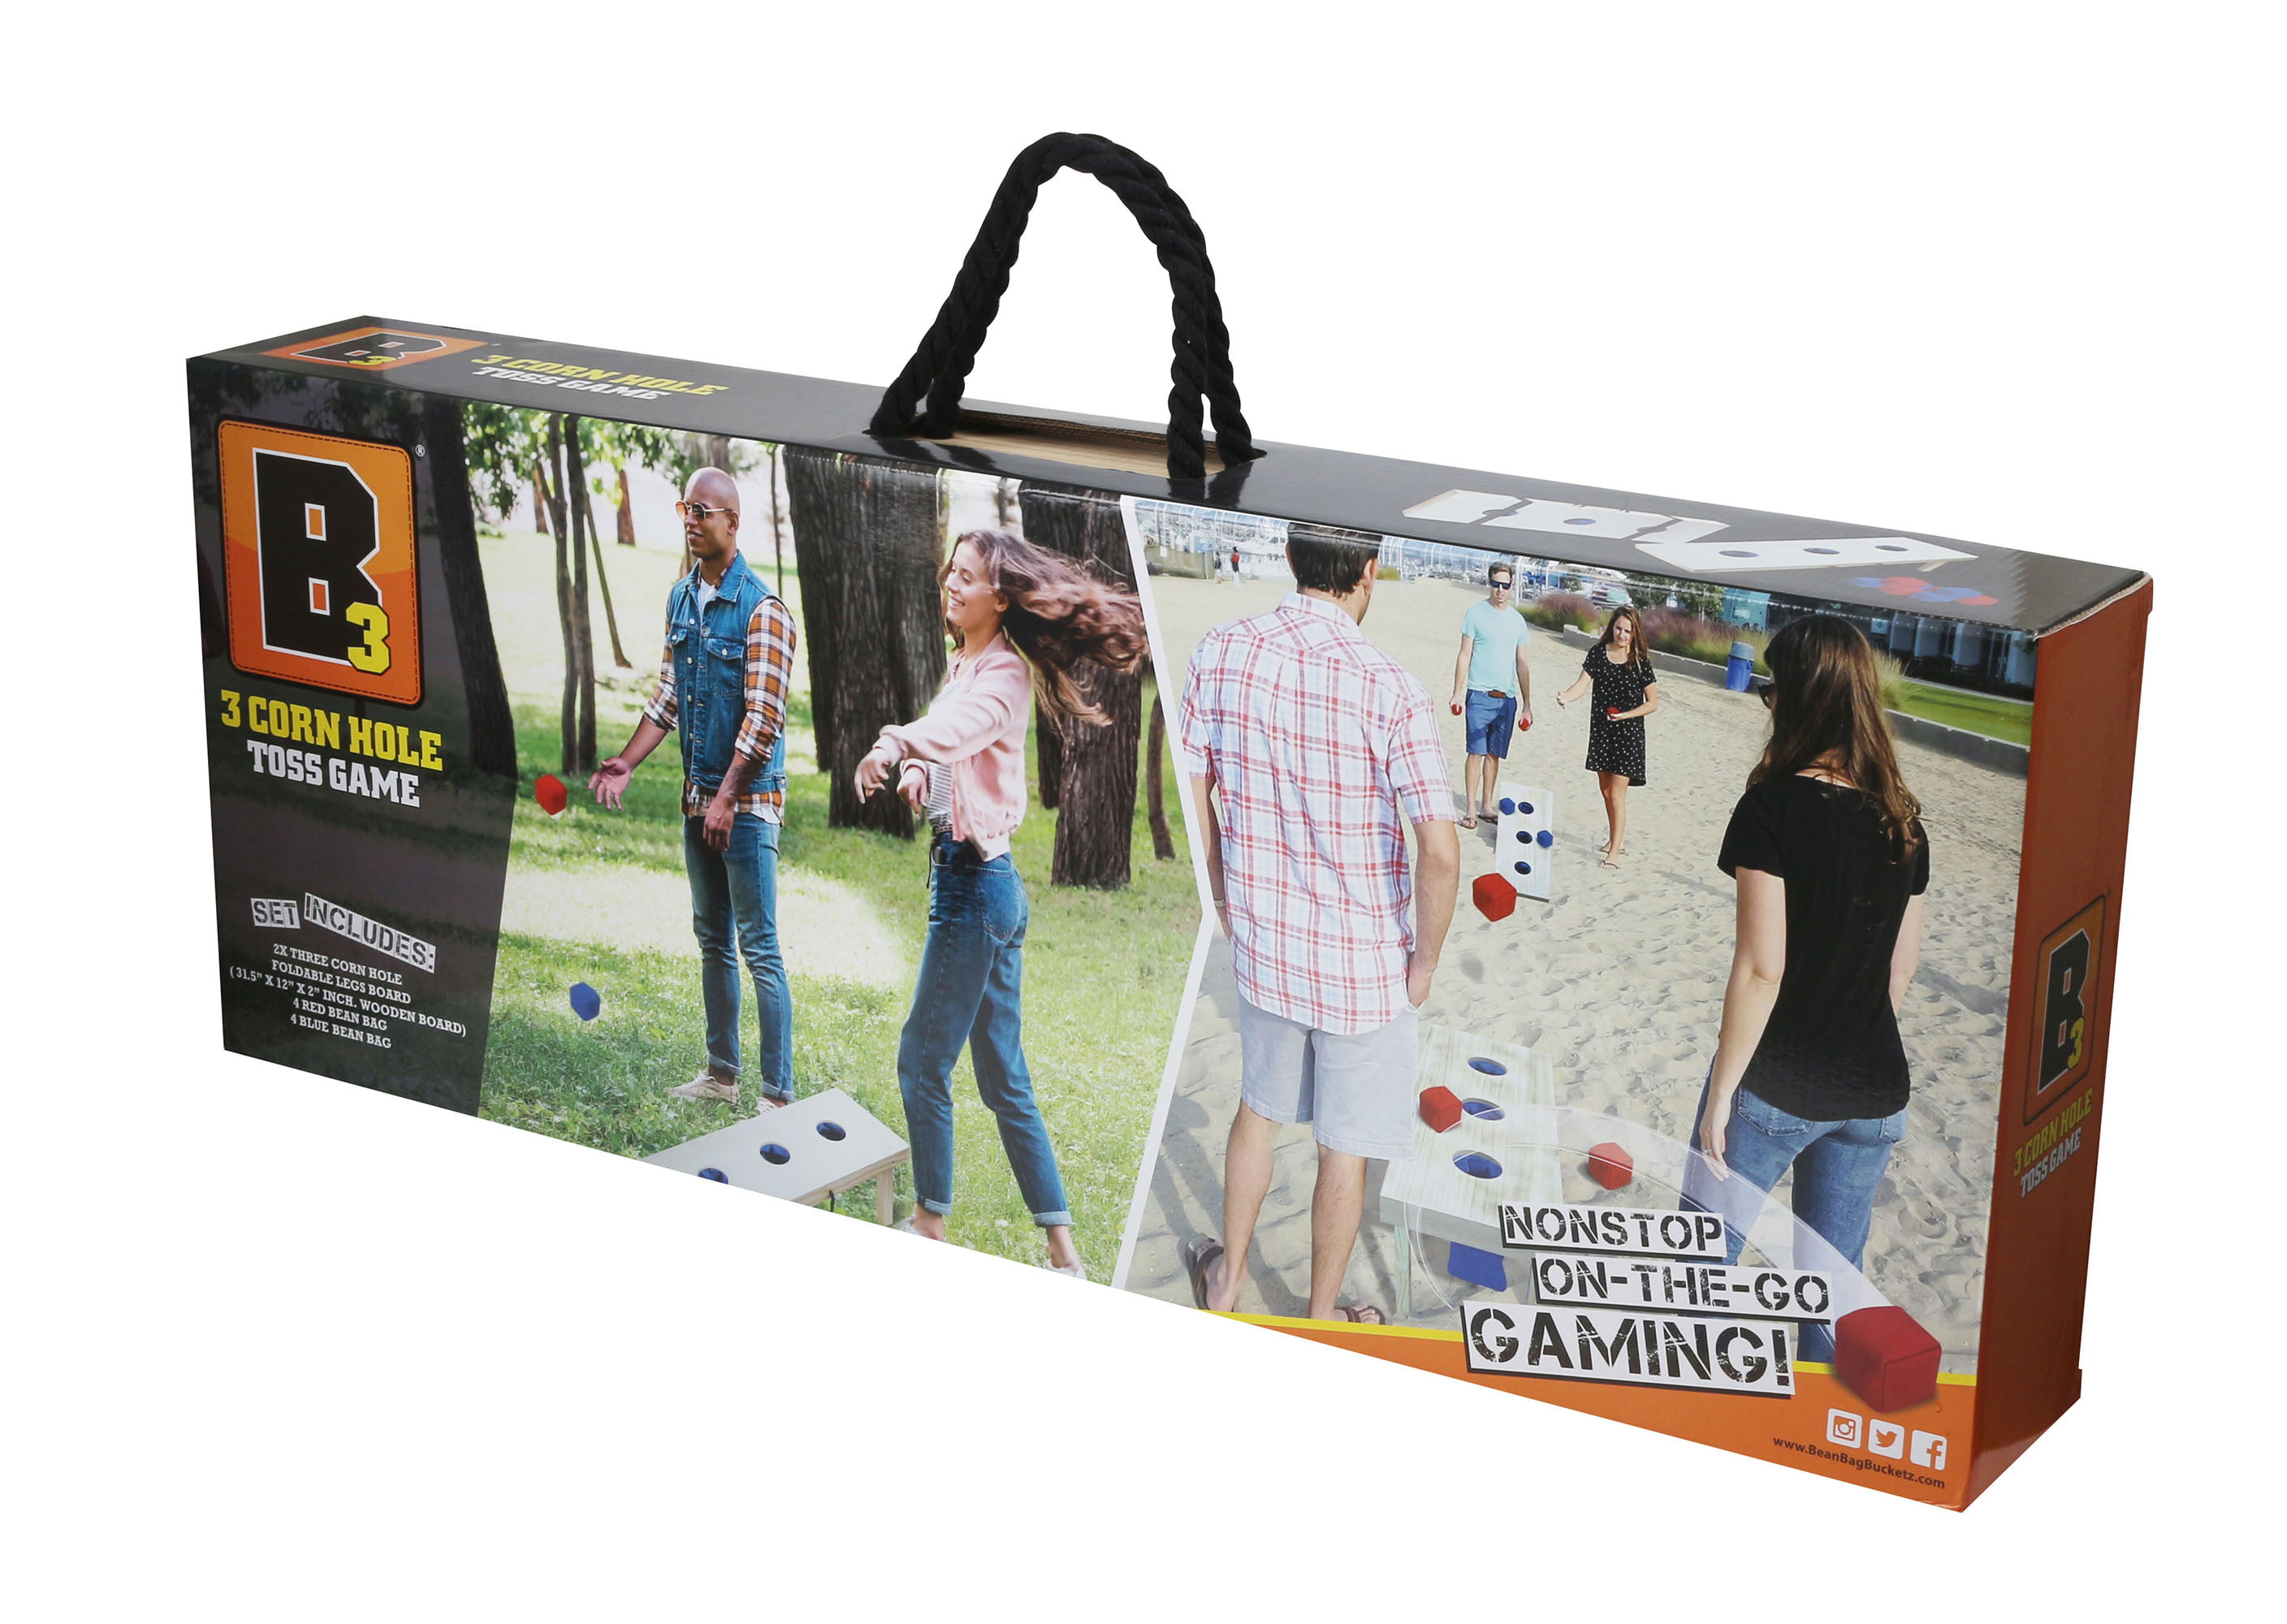 8-Quality-Cornhole-Bean-bags-All-Weather-Corn-Hole-Bags-Free-Bag-Carry-Pack! 